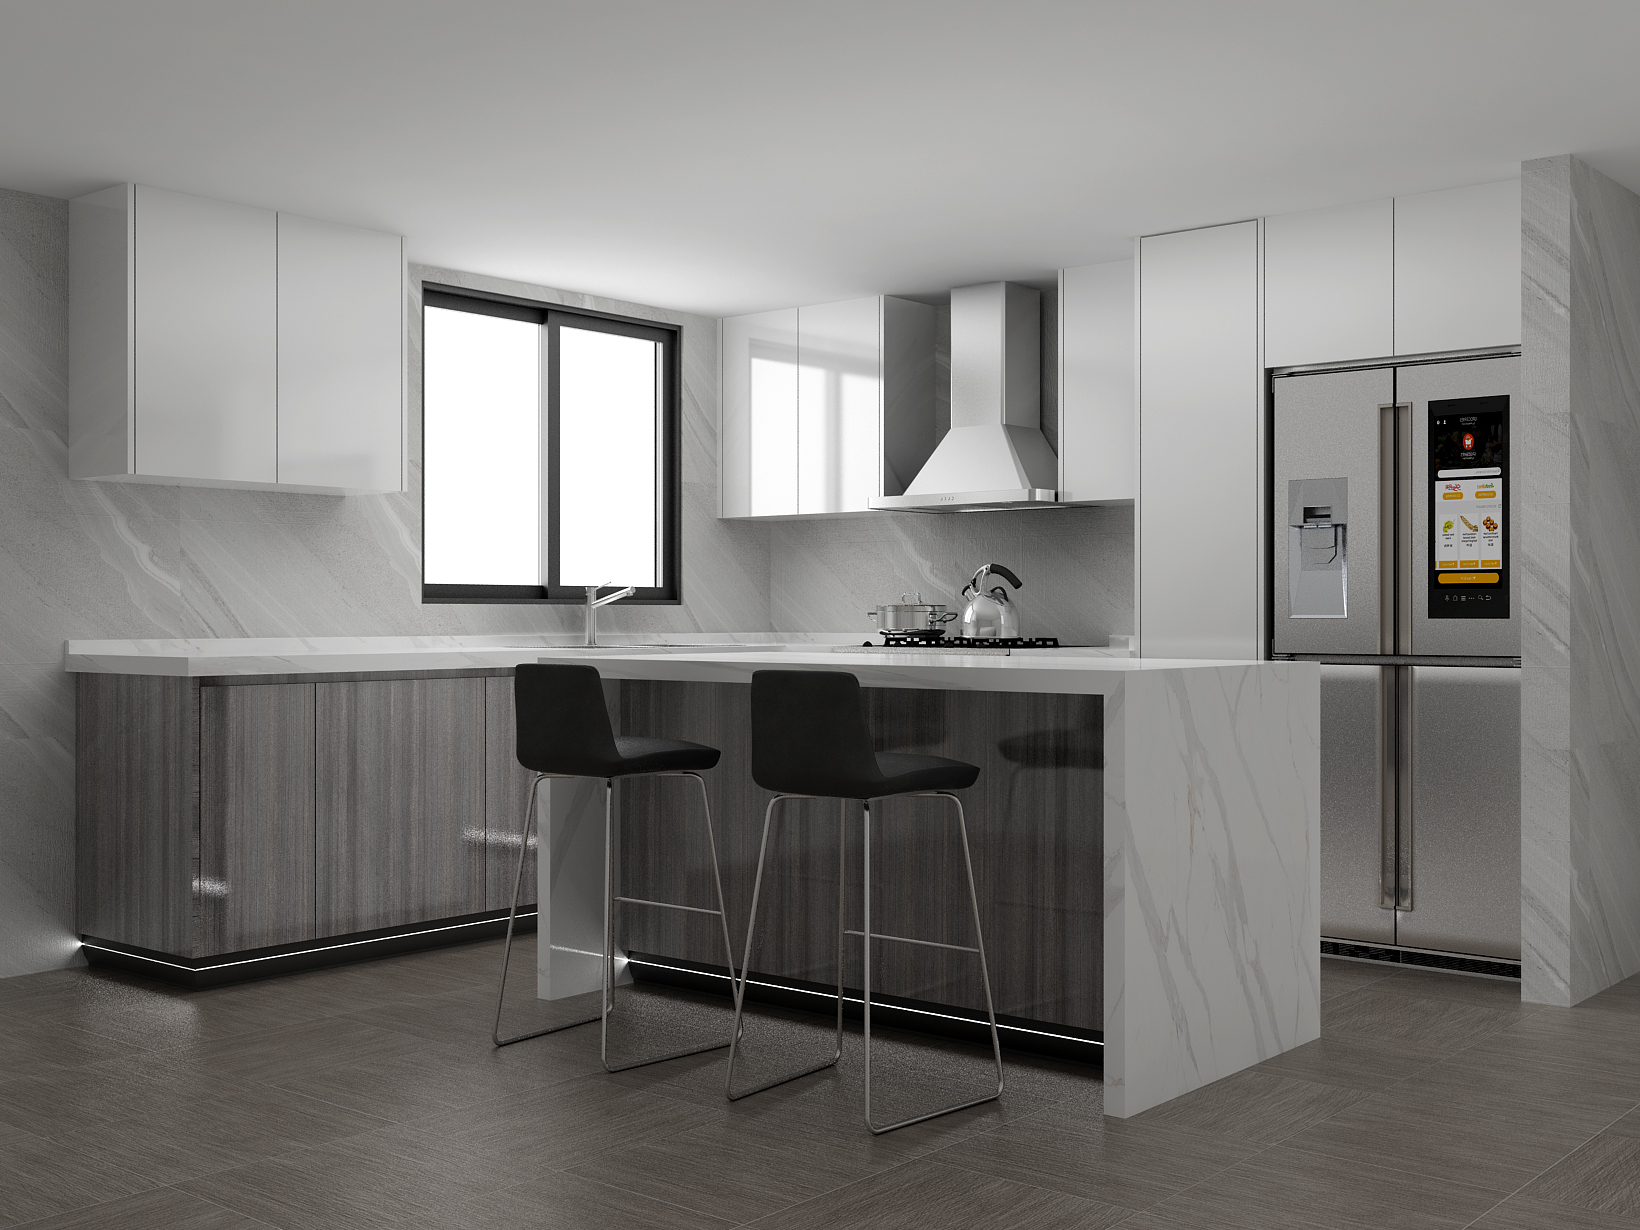 L-Shaped kitchen with island counter